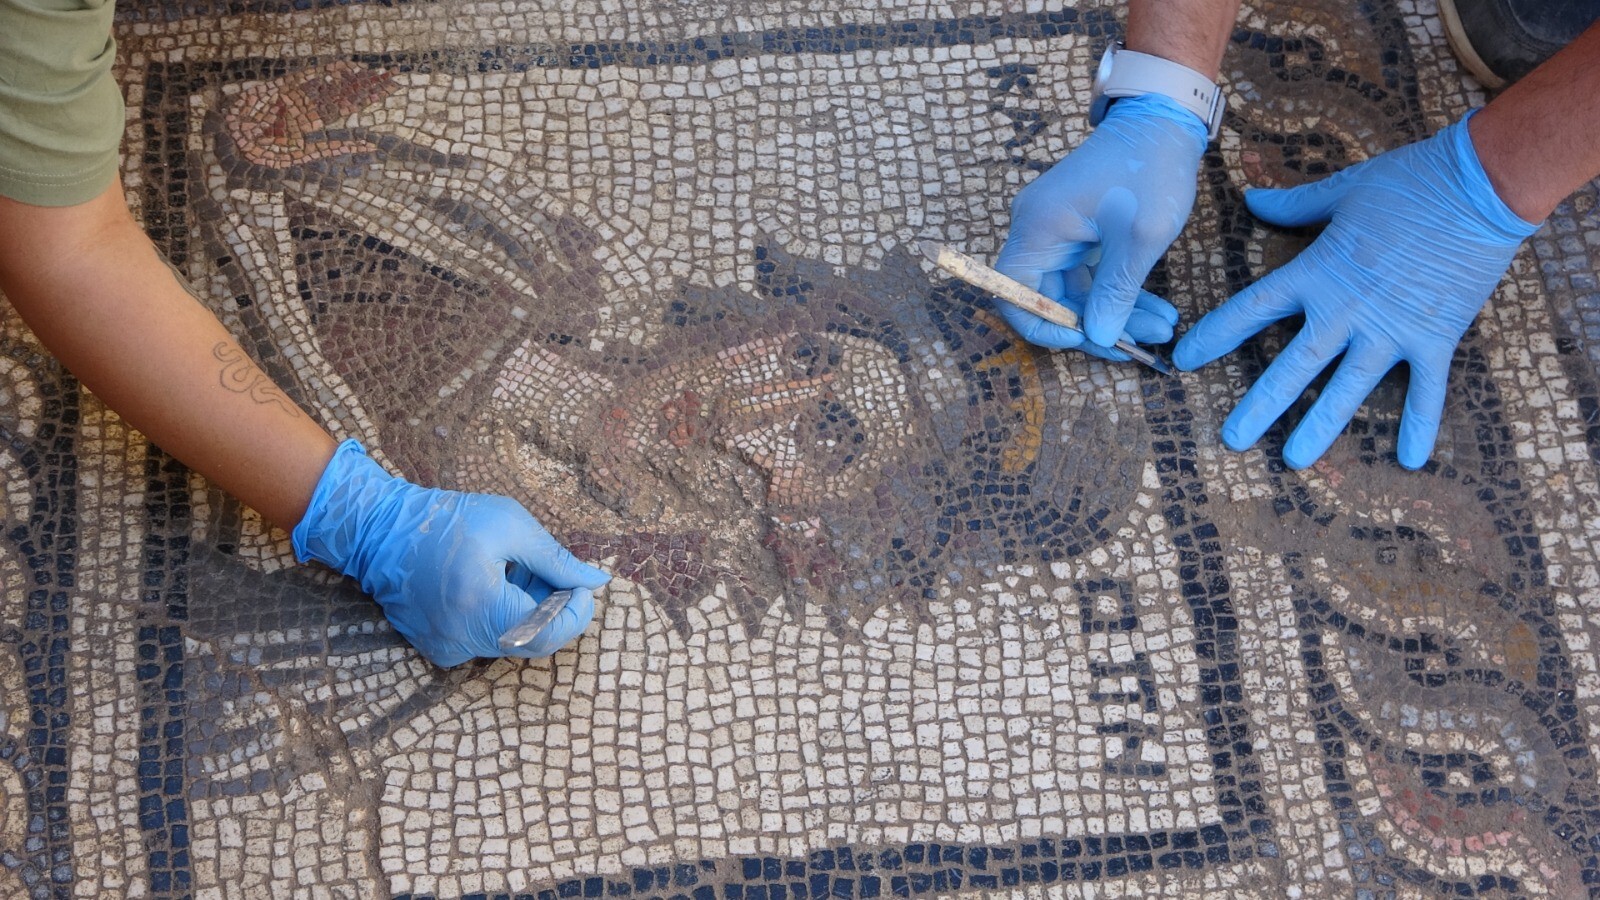 Antalya's ancient city of Side yields remarkable mosaic find